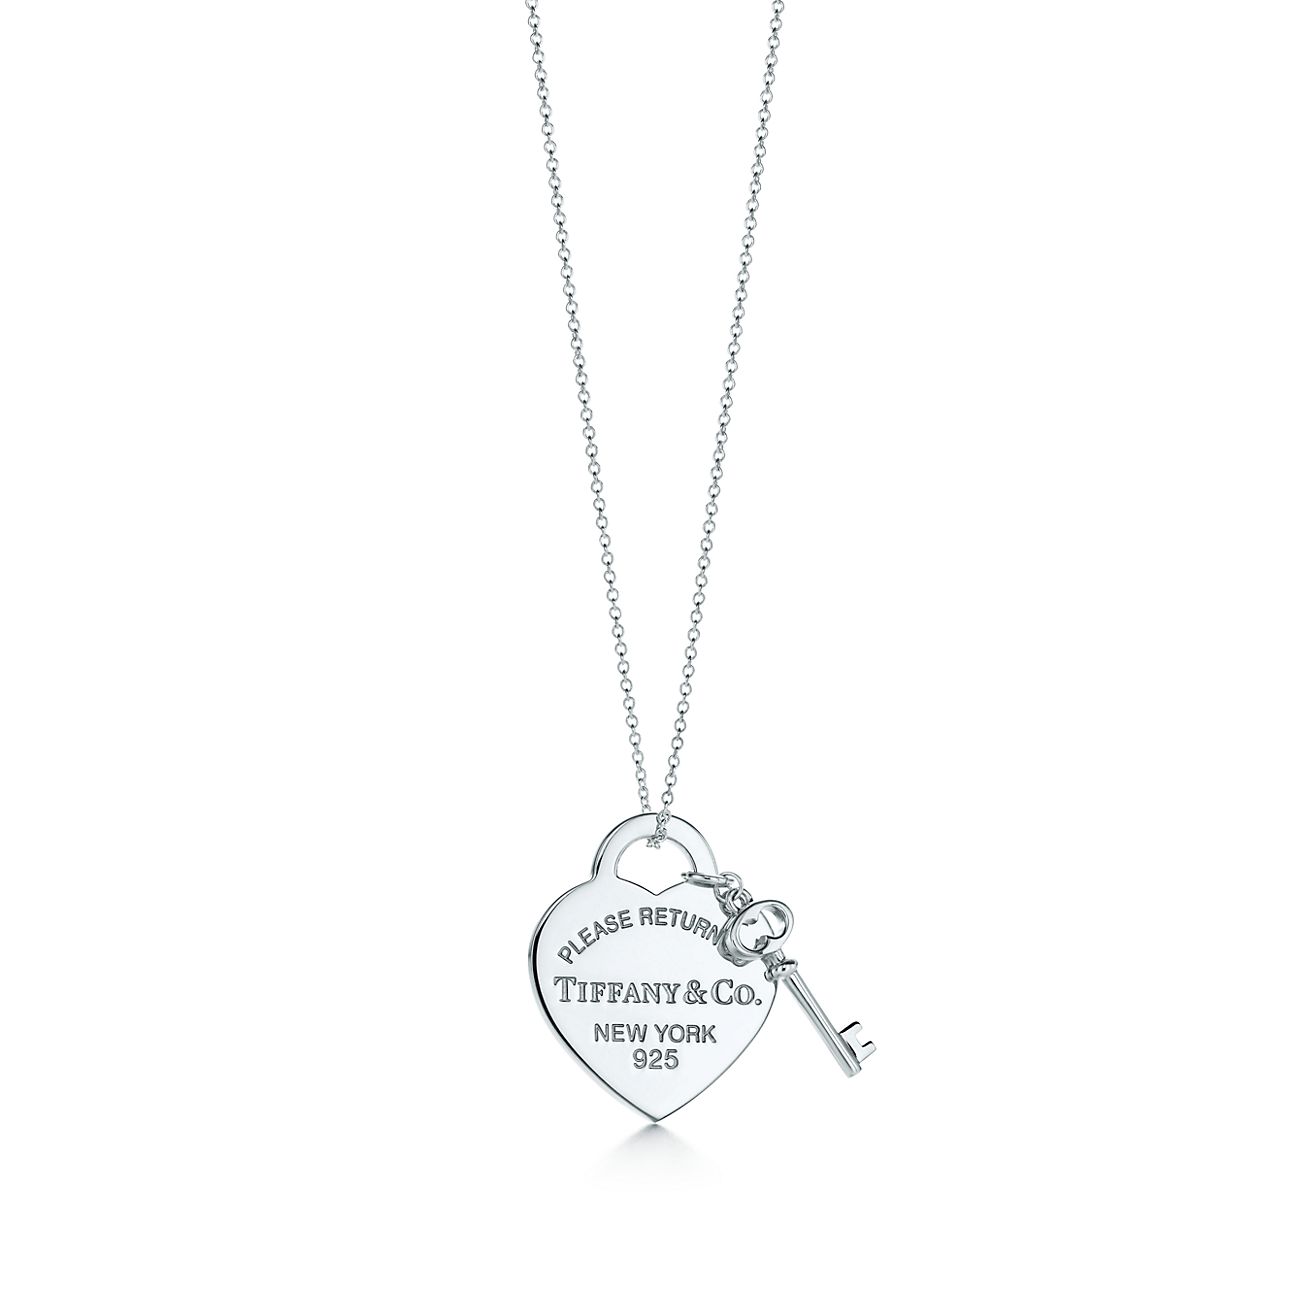 Charming Heart Necklace with Engraved Beads in Sterling Silver - MYKA